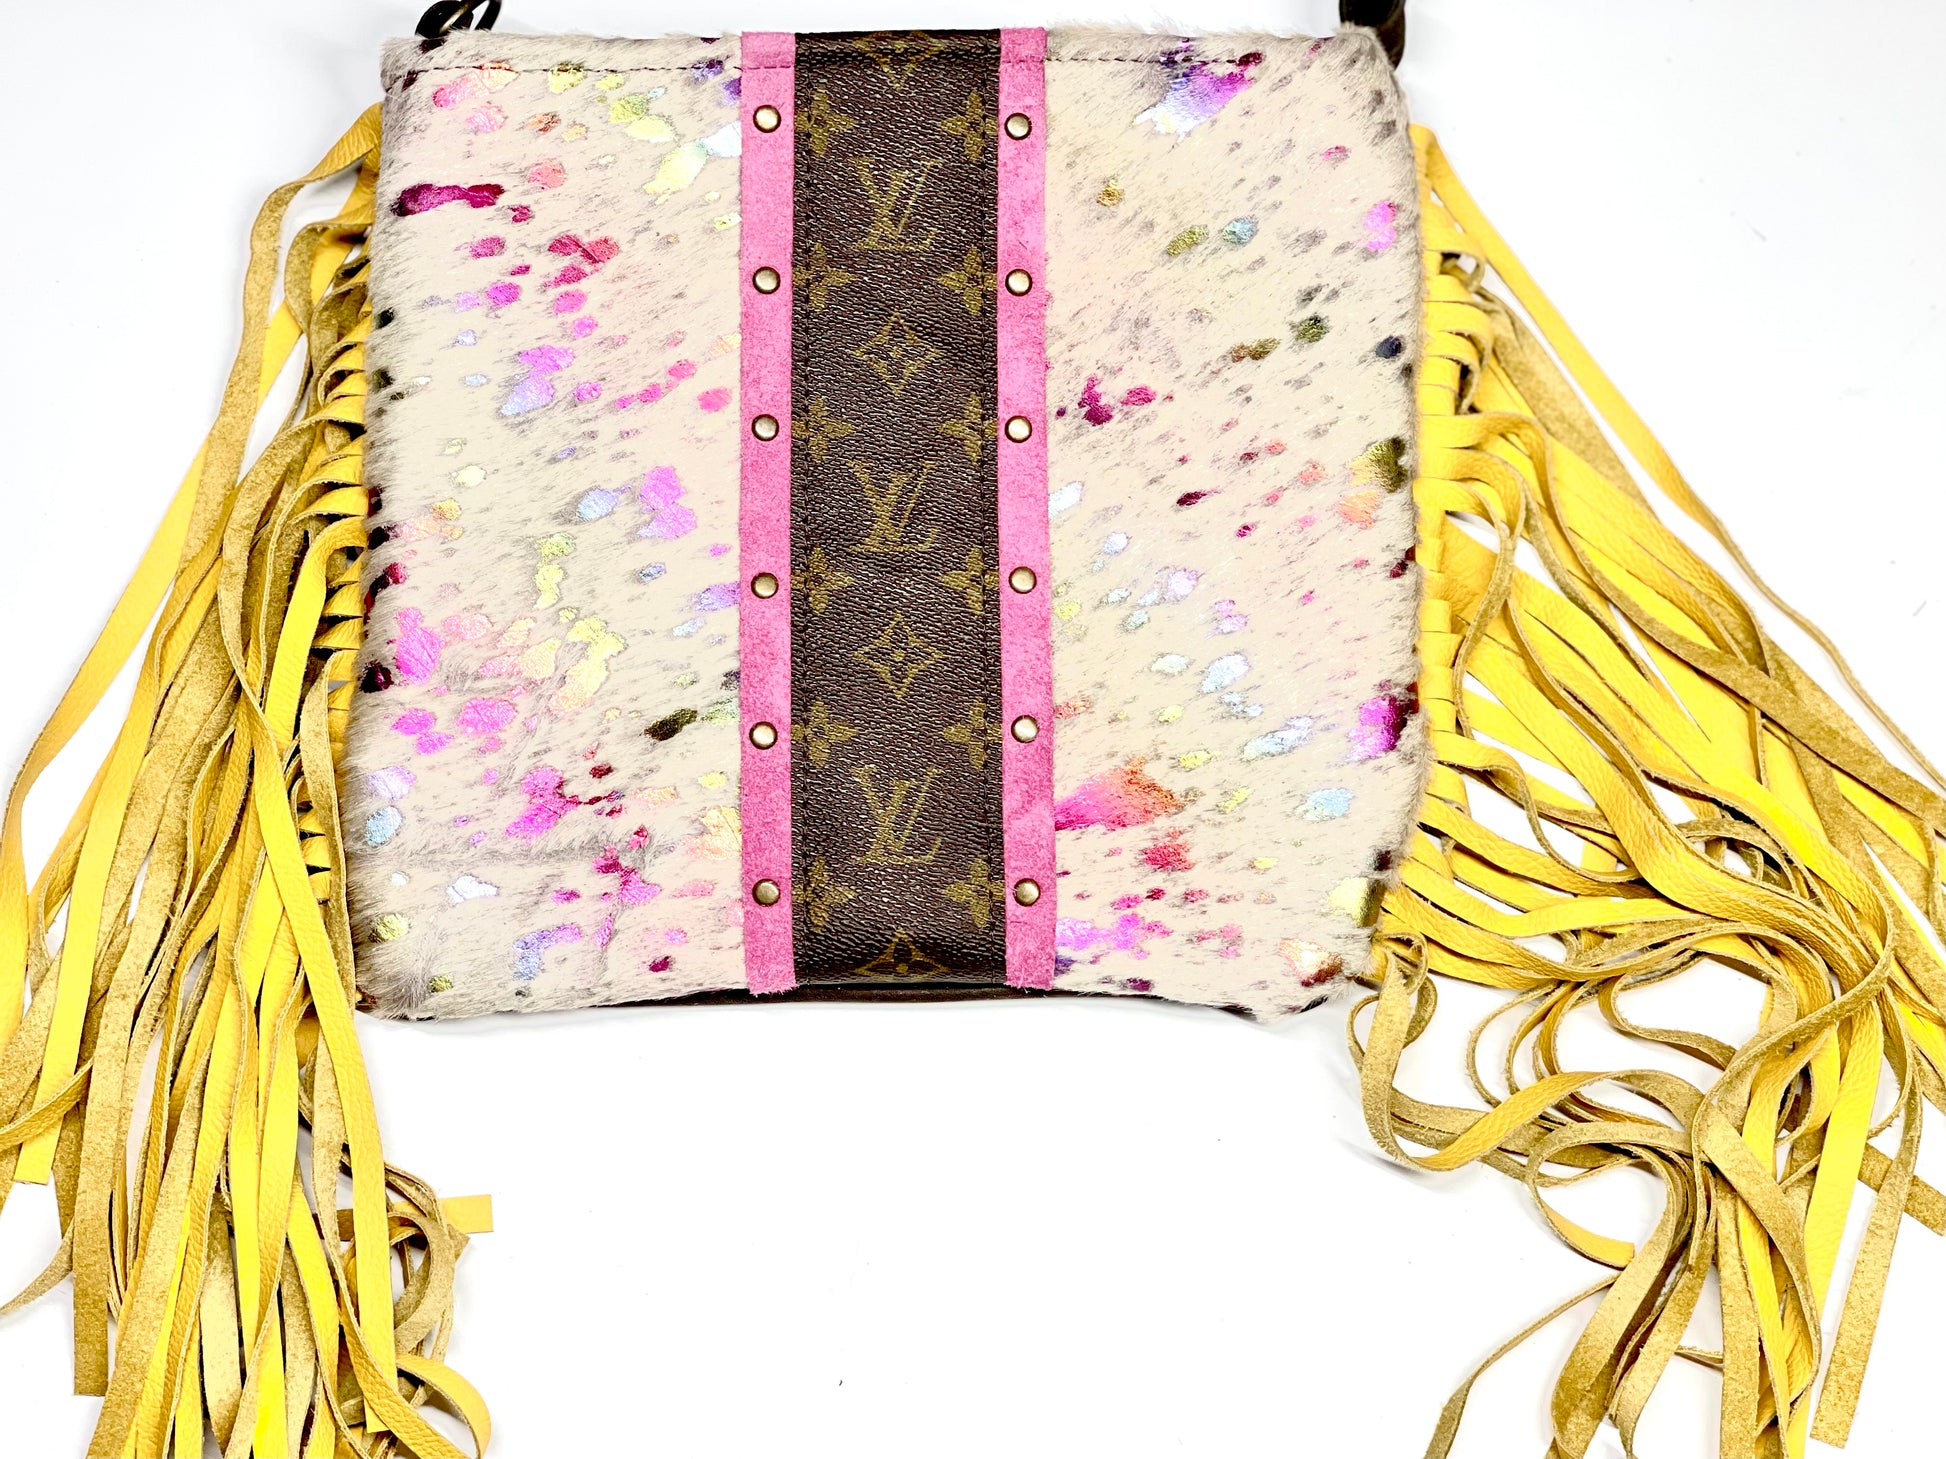 Medium Crossbody - Rainbow Brite, Pink Suede Strip Antique Hardware - Patches Of Upcycling